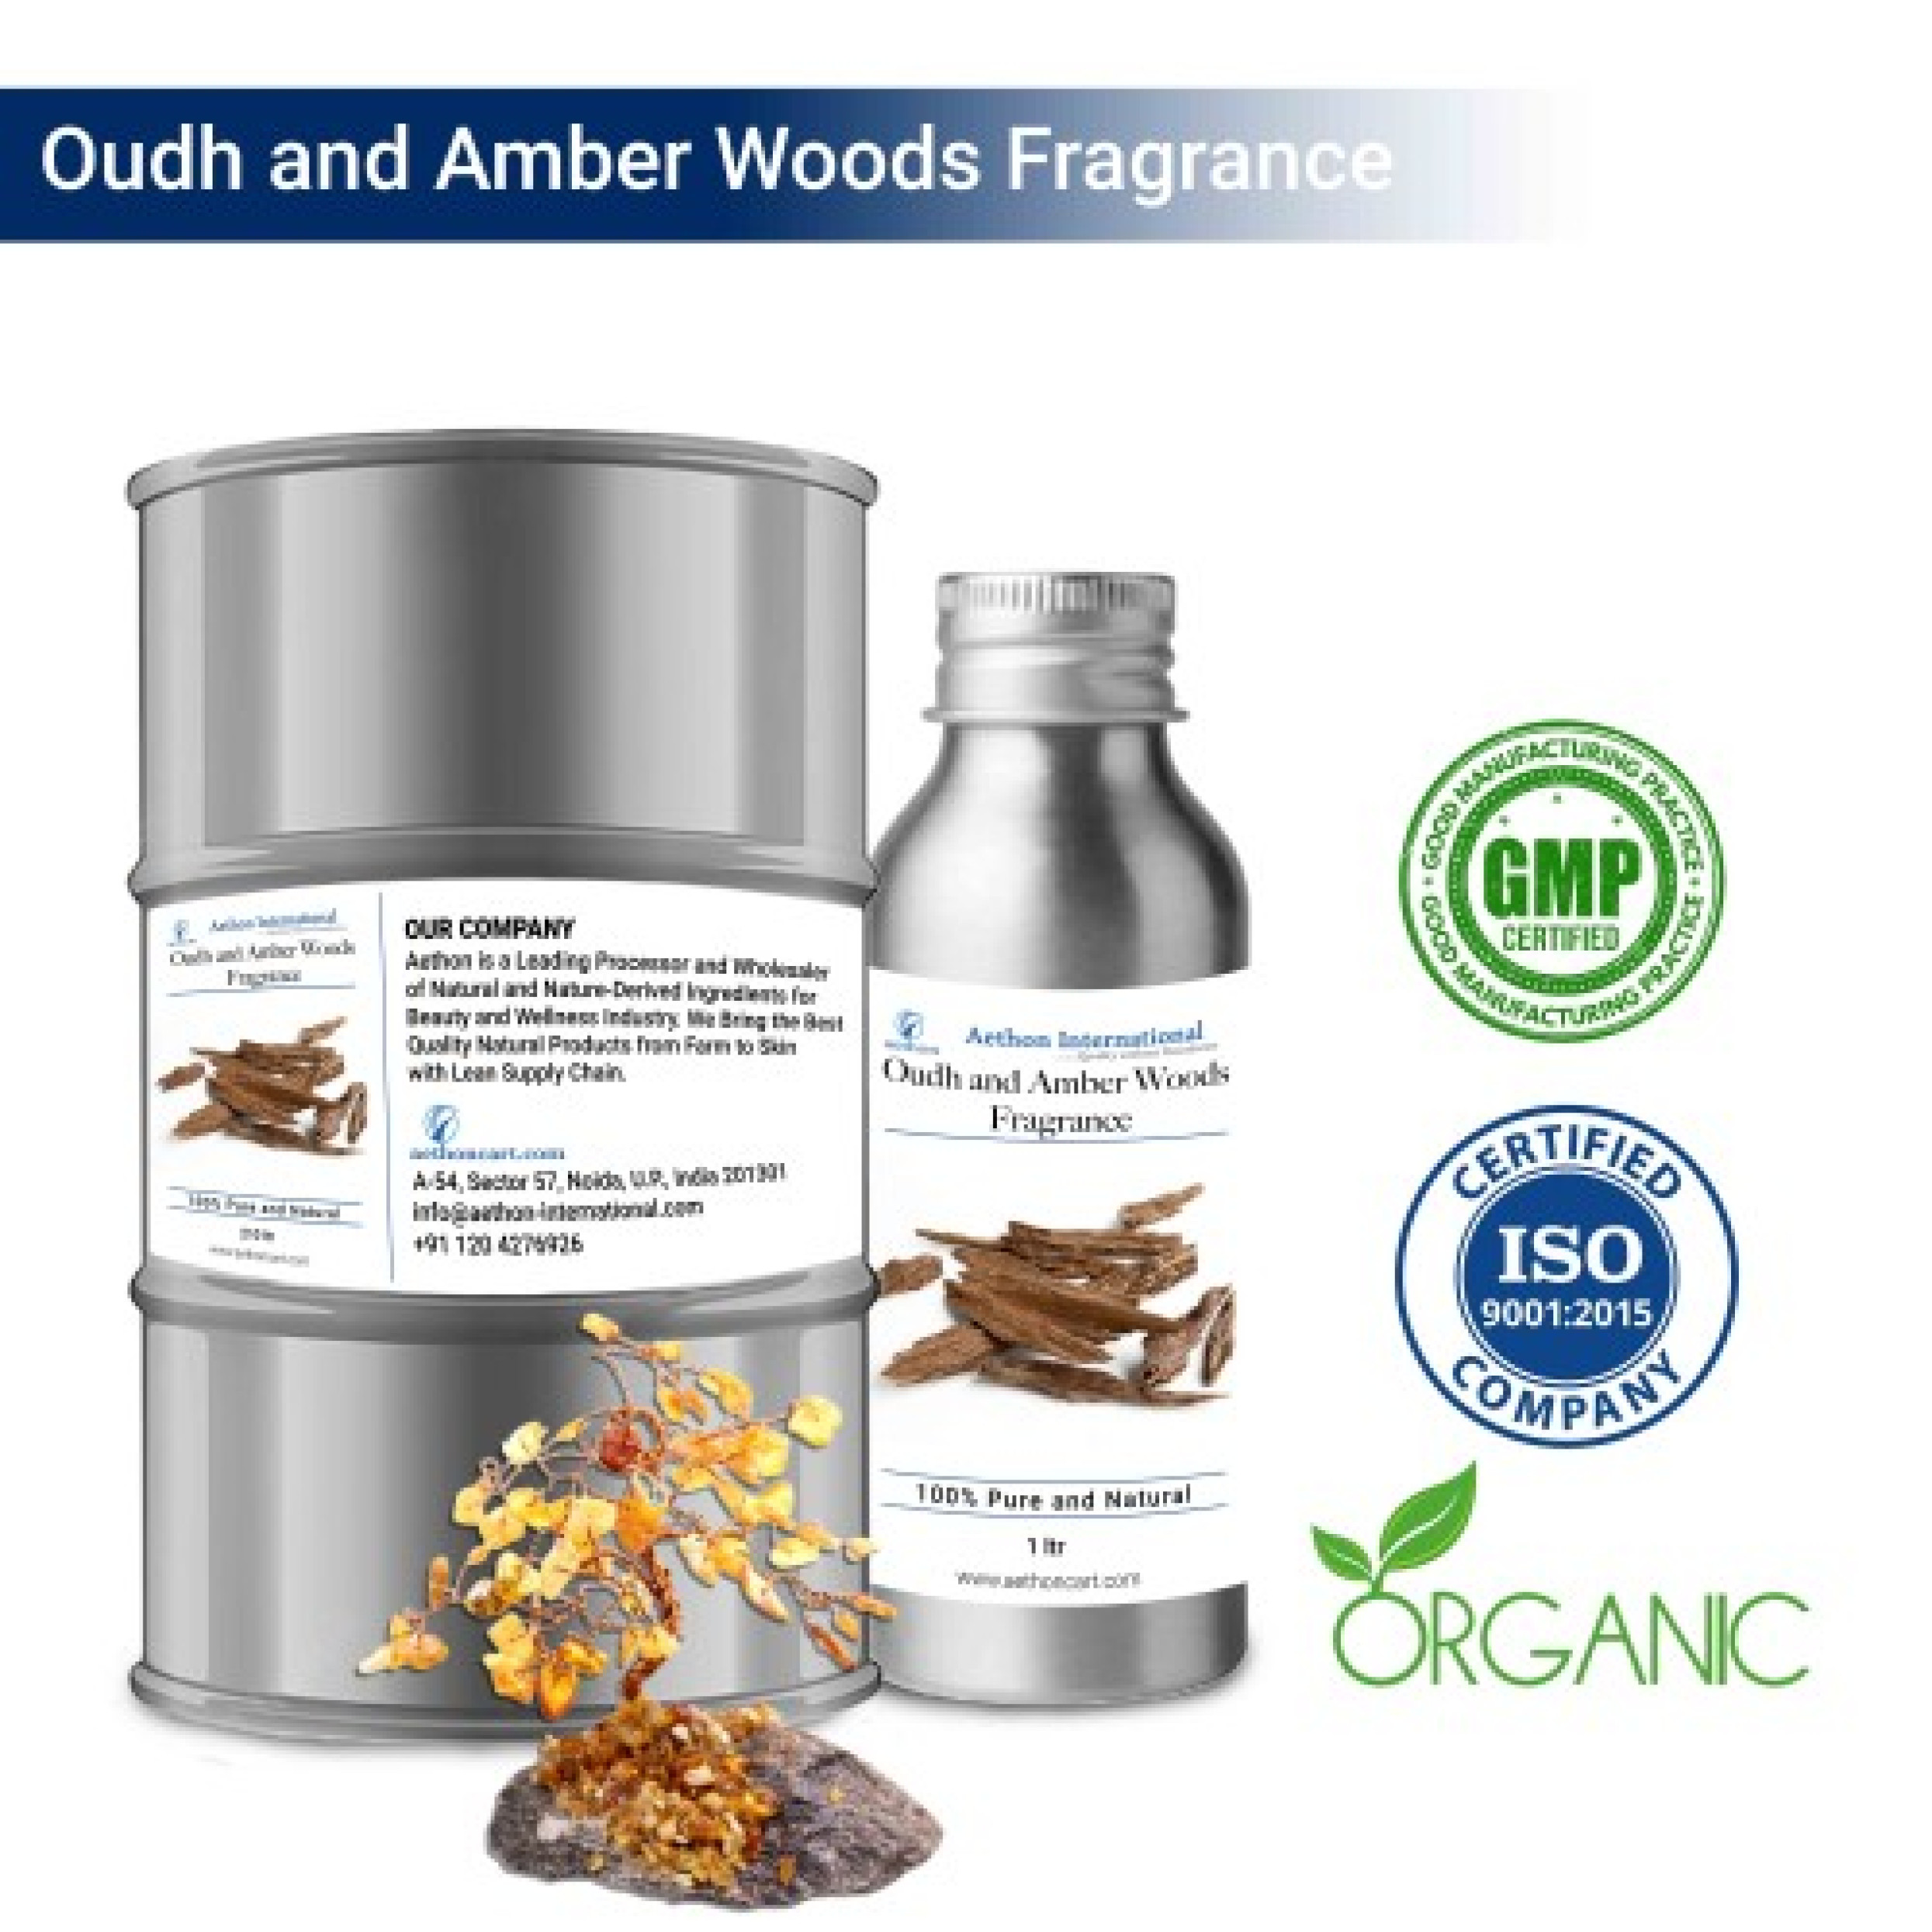 Oudh and Amber Woods Fragrance